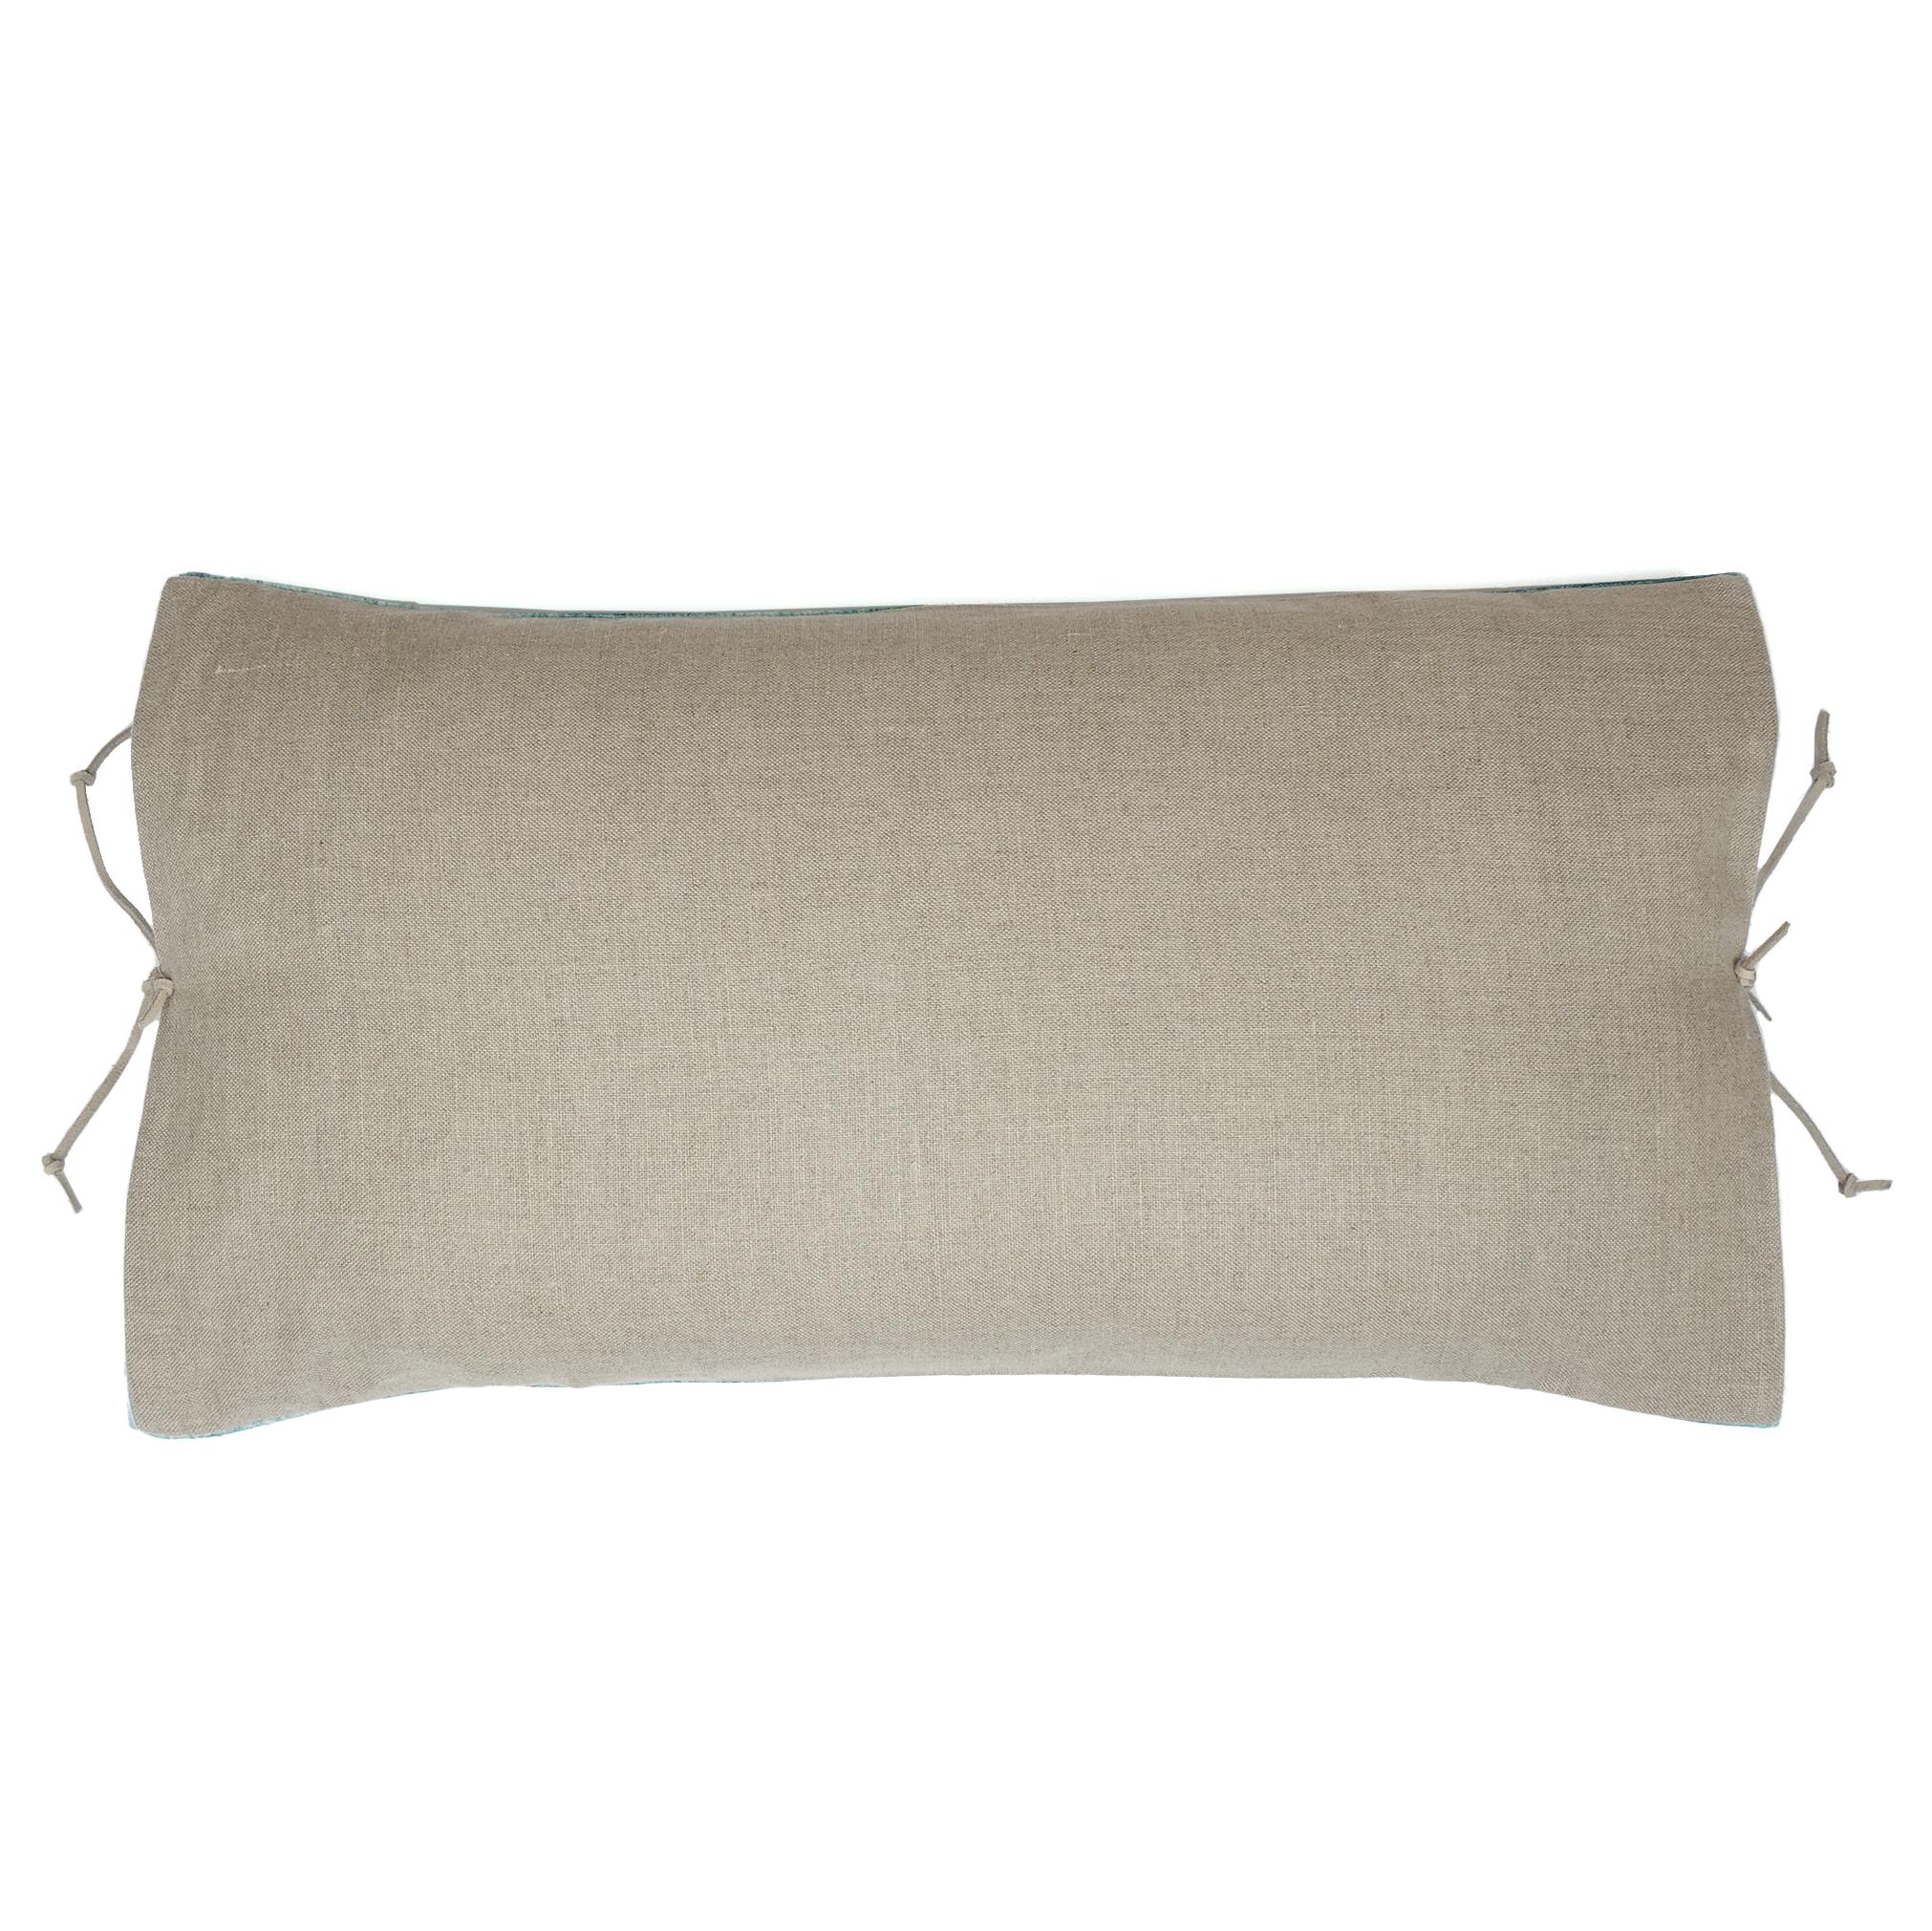 A luxury handmade decorative throw pillow made of printed cotton velvet front and solid Belgian linen back, great for adding comfort and casual, laid-back style to a contemporary living room, bedroom or lounge. Cotton velvet is a high quality,